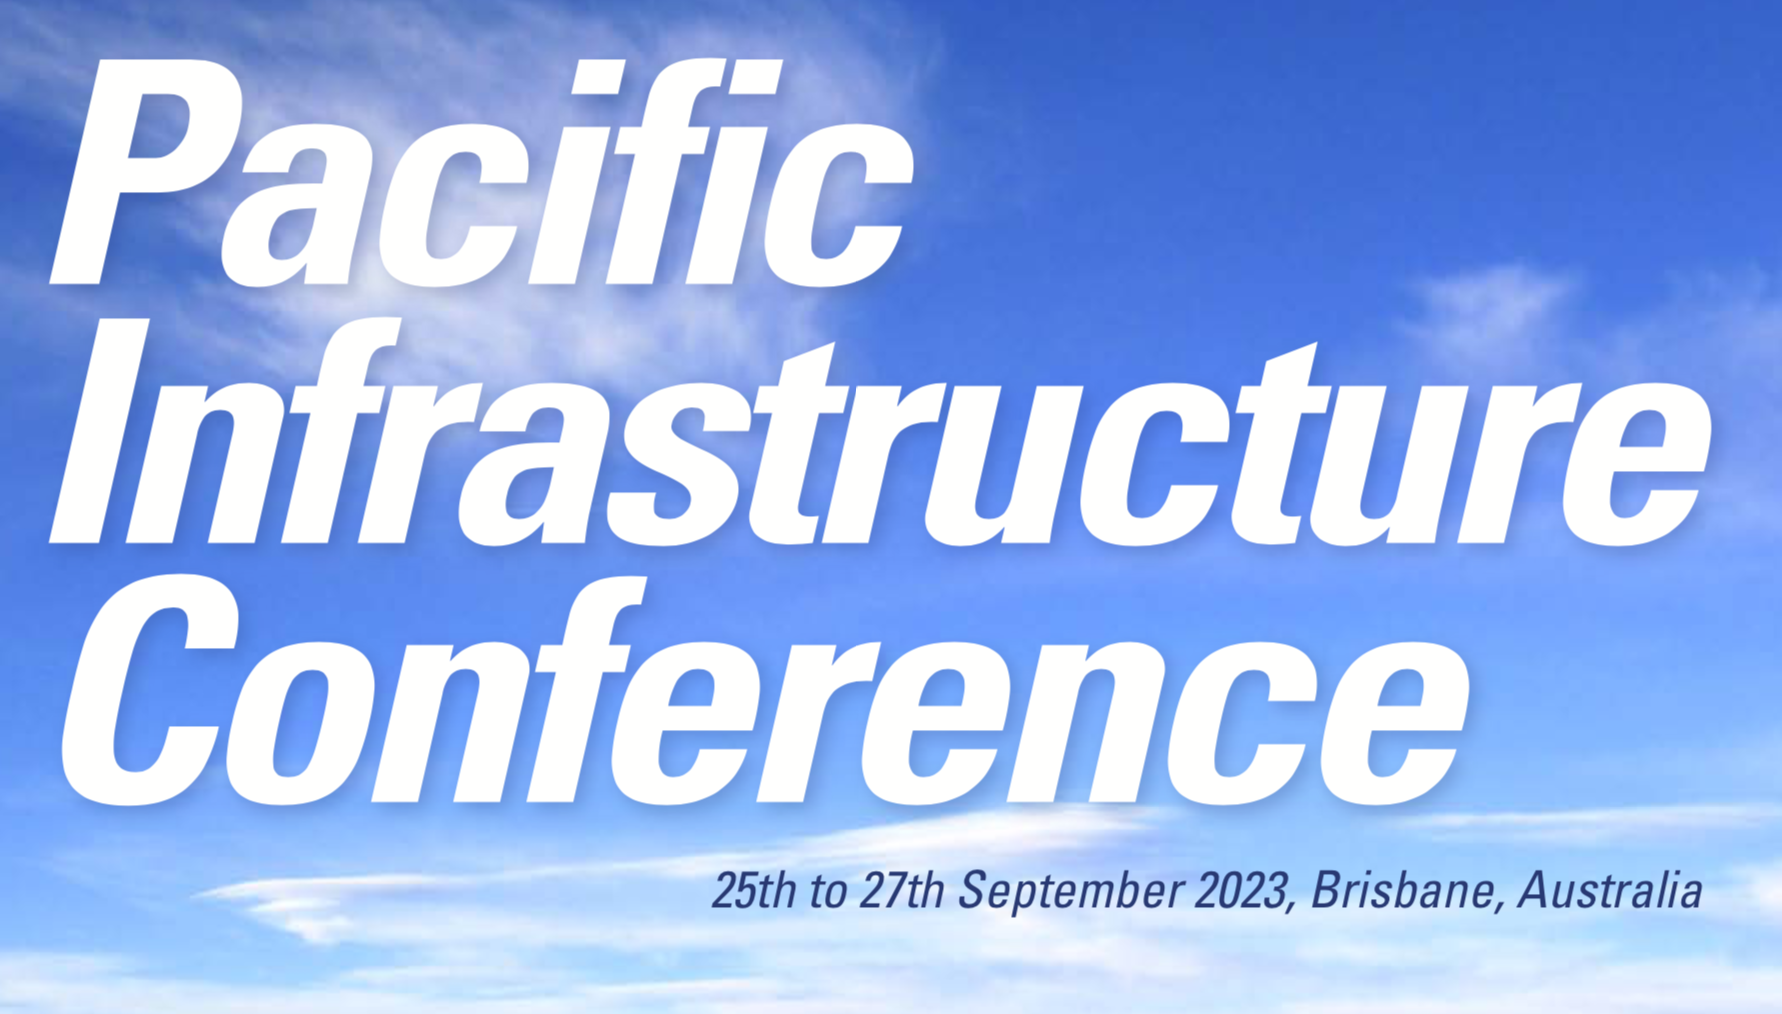 Pacific Infrastructure Conference Registration Now Open Australia